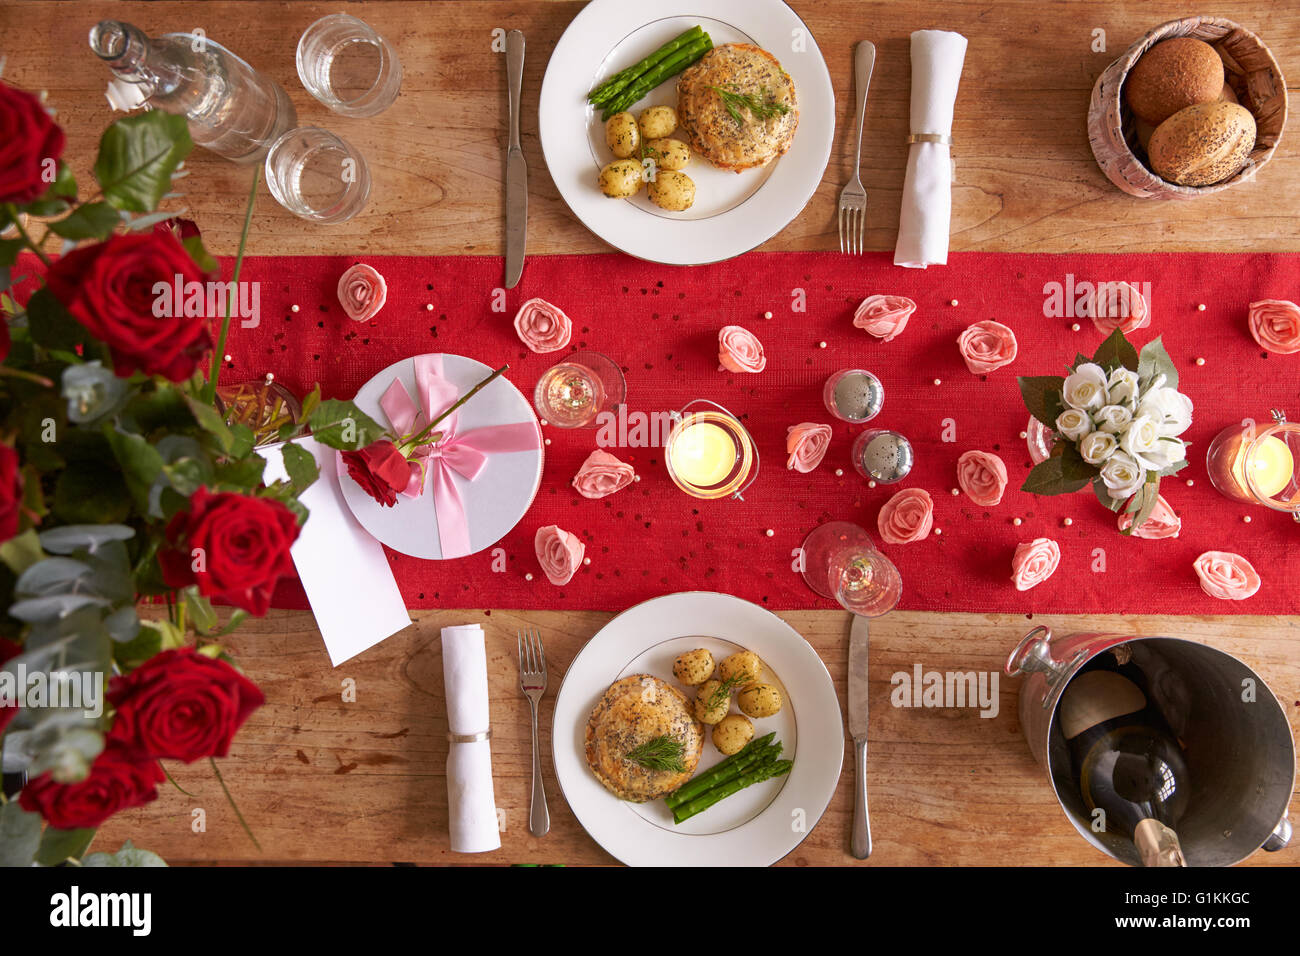 Table Setting For Romantic Valentines Day Meal Stock Photo